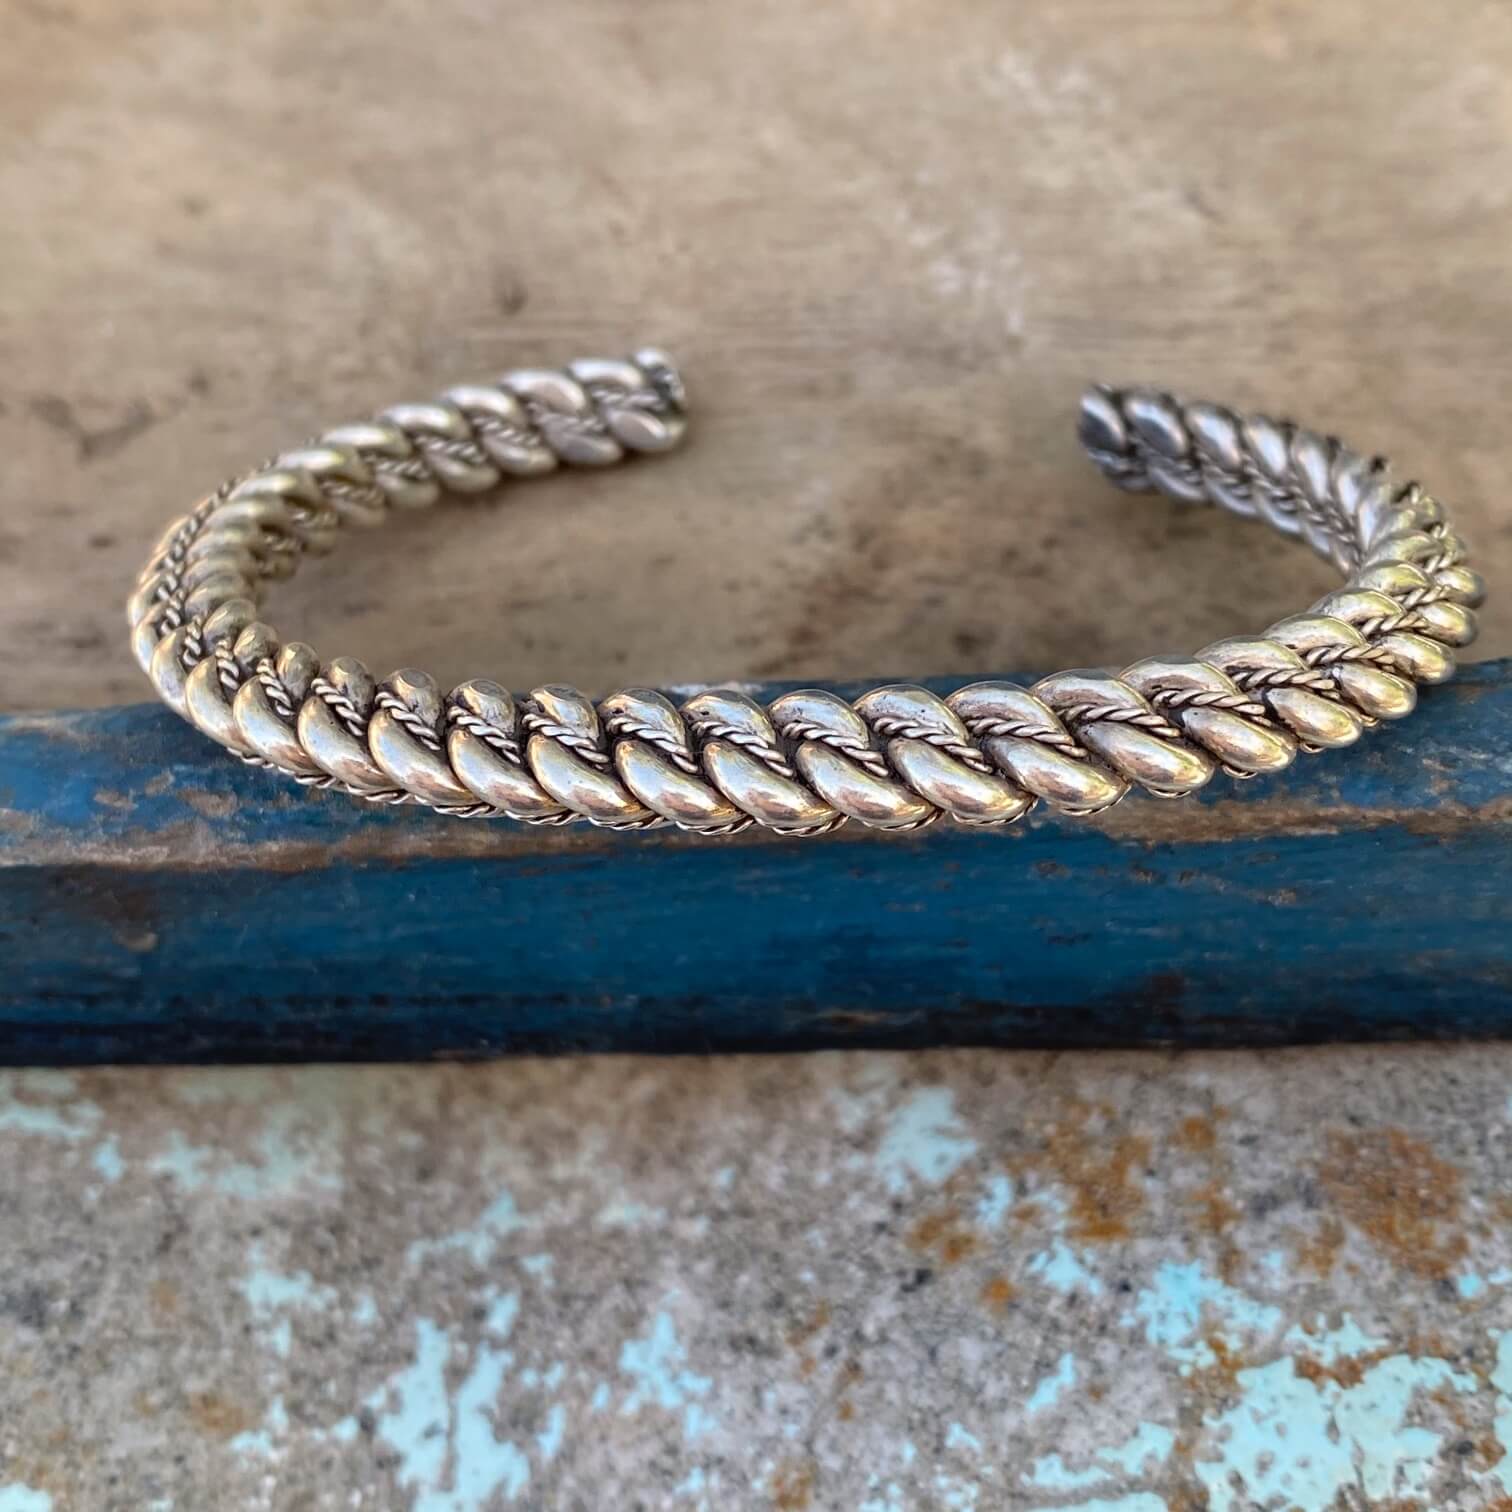 The Prettiest Sterling Silver Twisted Wire Cuff Bracelet Ever